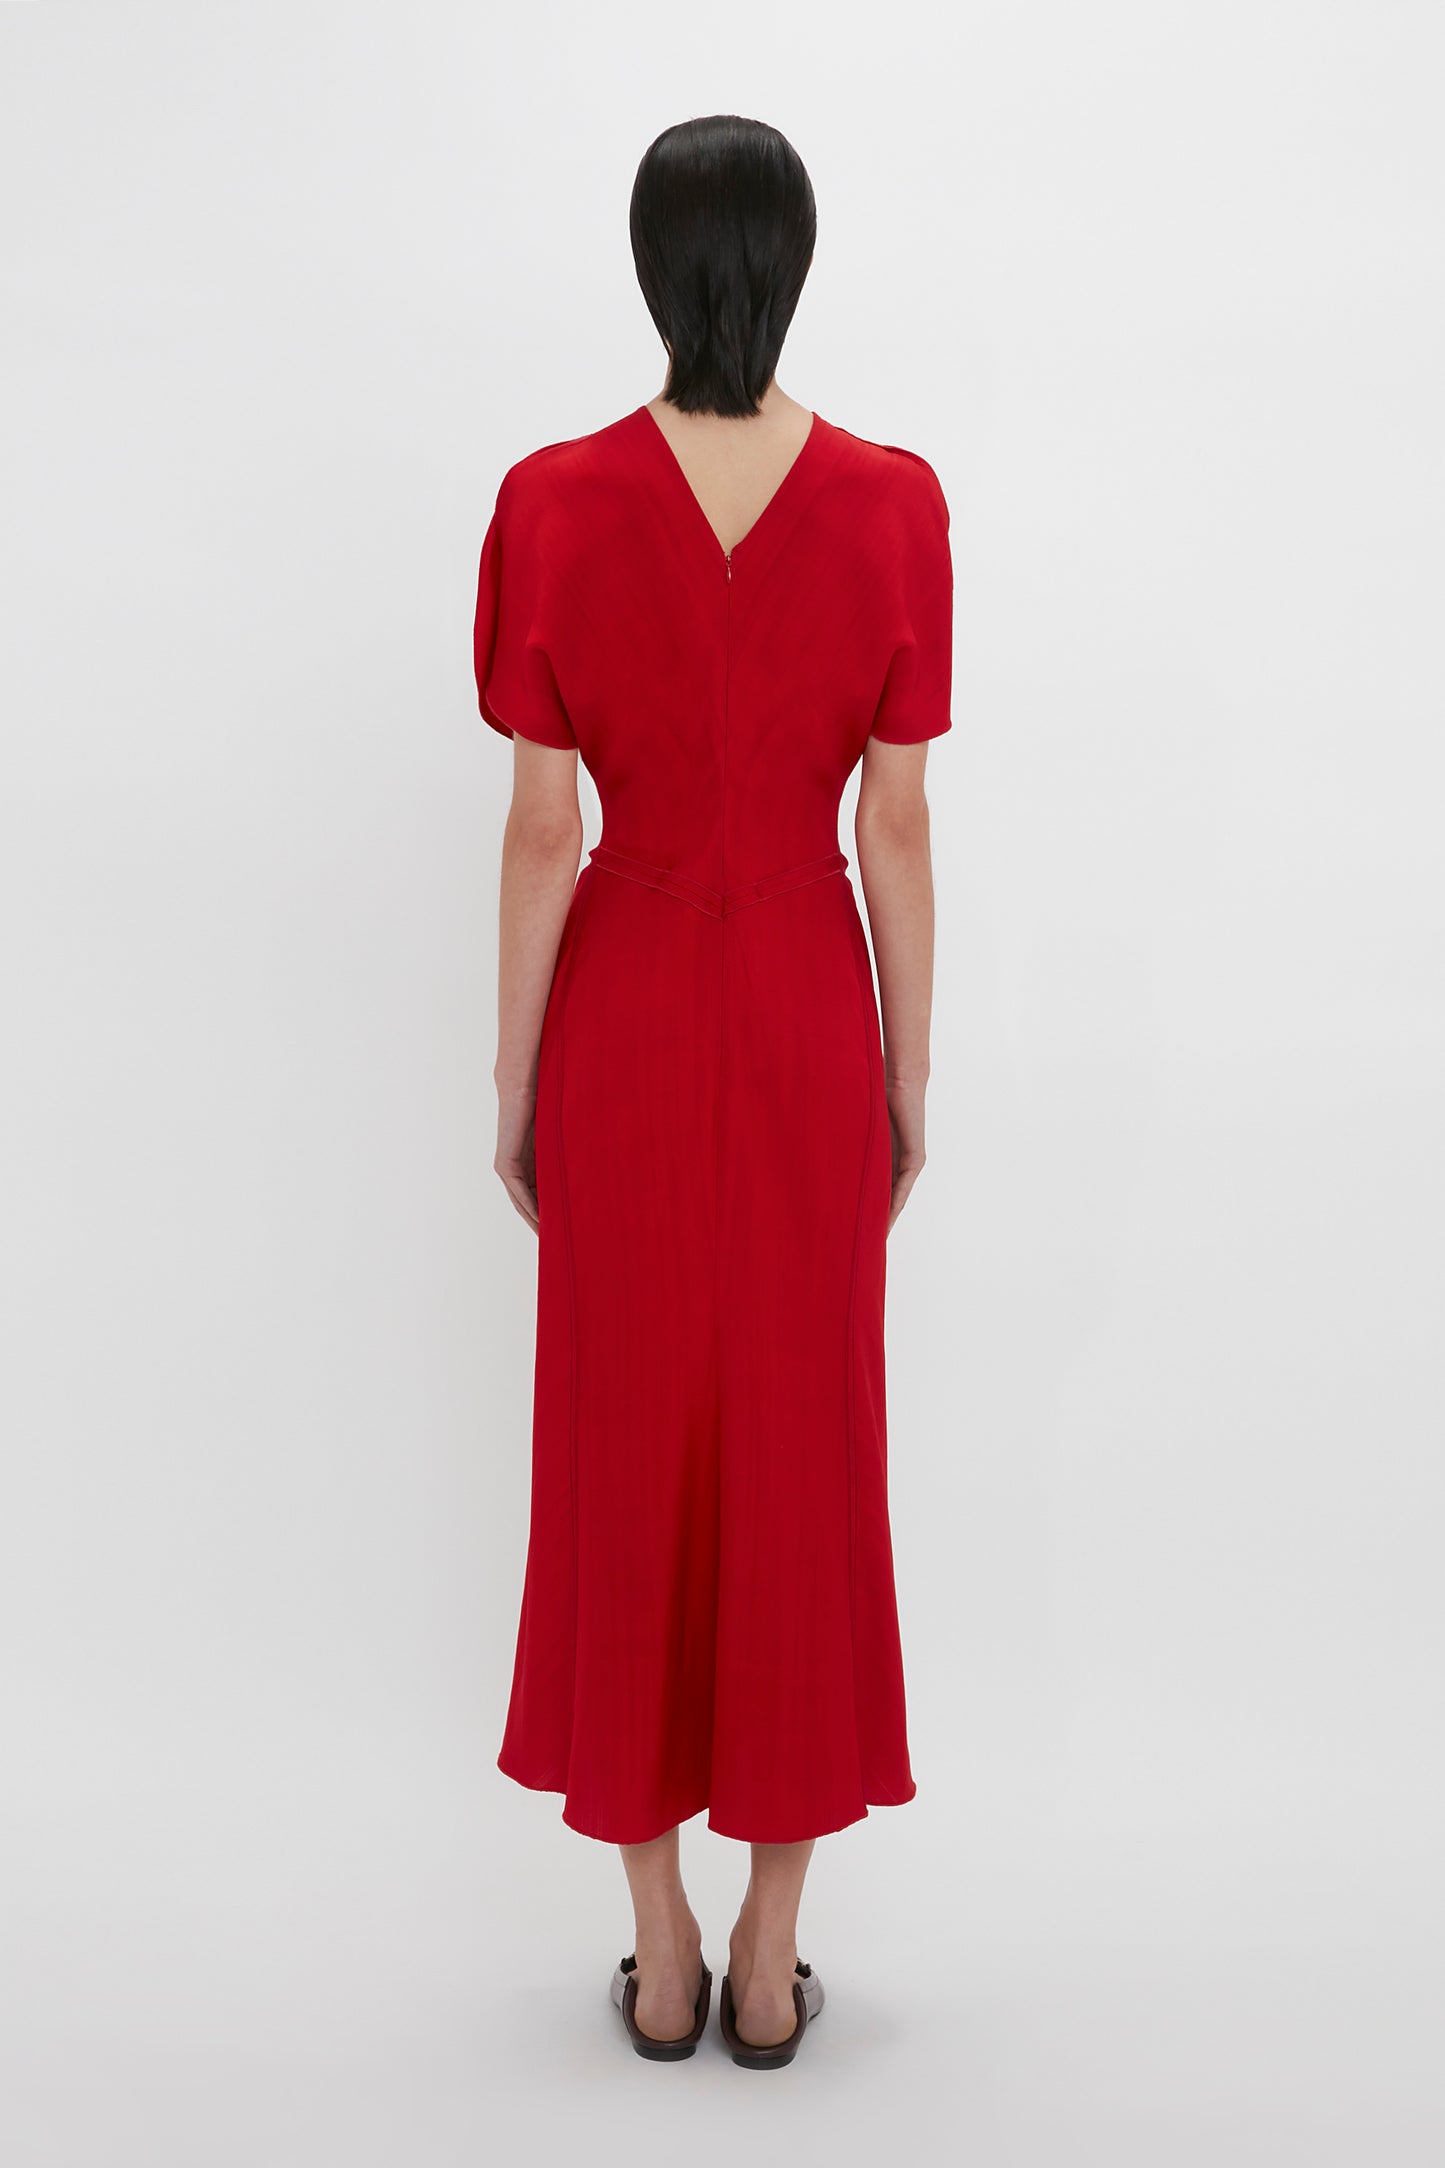 A woman stands facing away, wearing a Victoria Beckham Exclusive Gathered V-Neck Midi Dress In Carmine with short sleeves and a v-neckline against a plain white background.